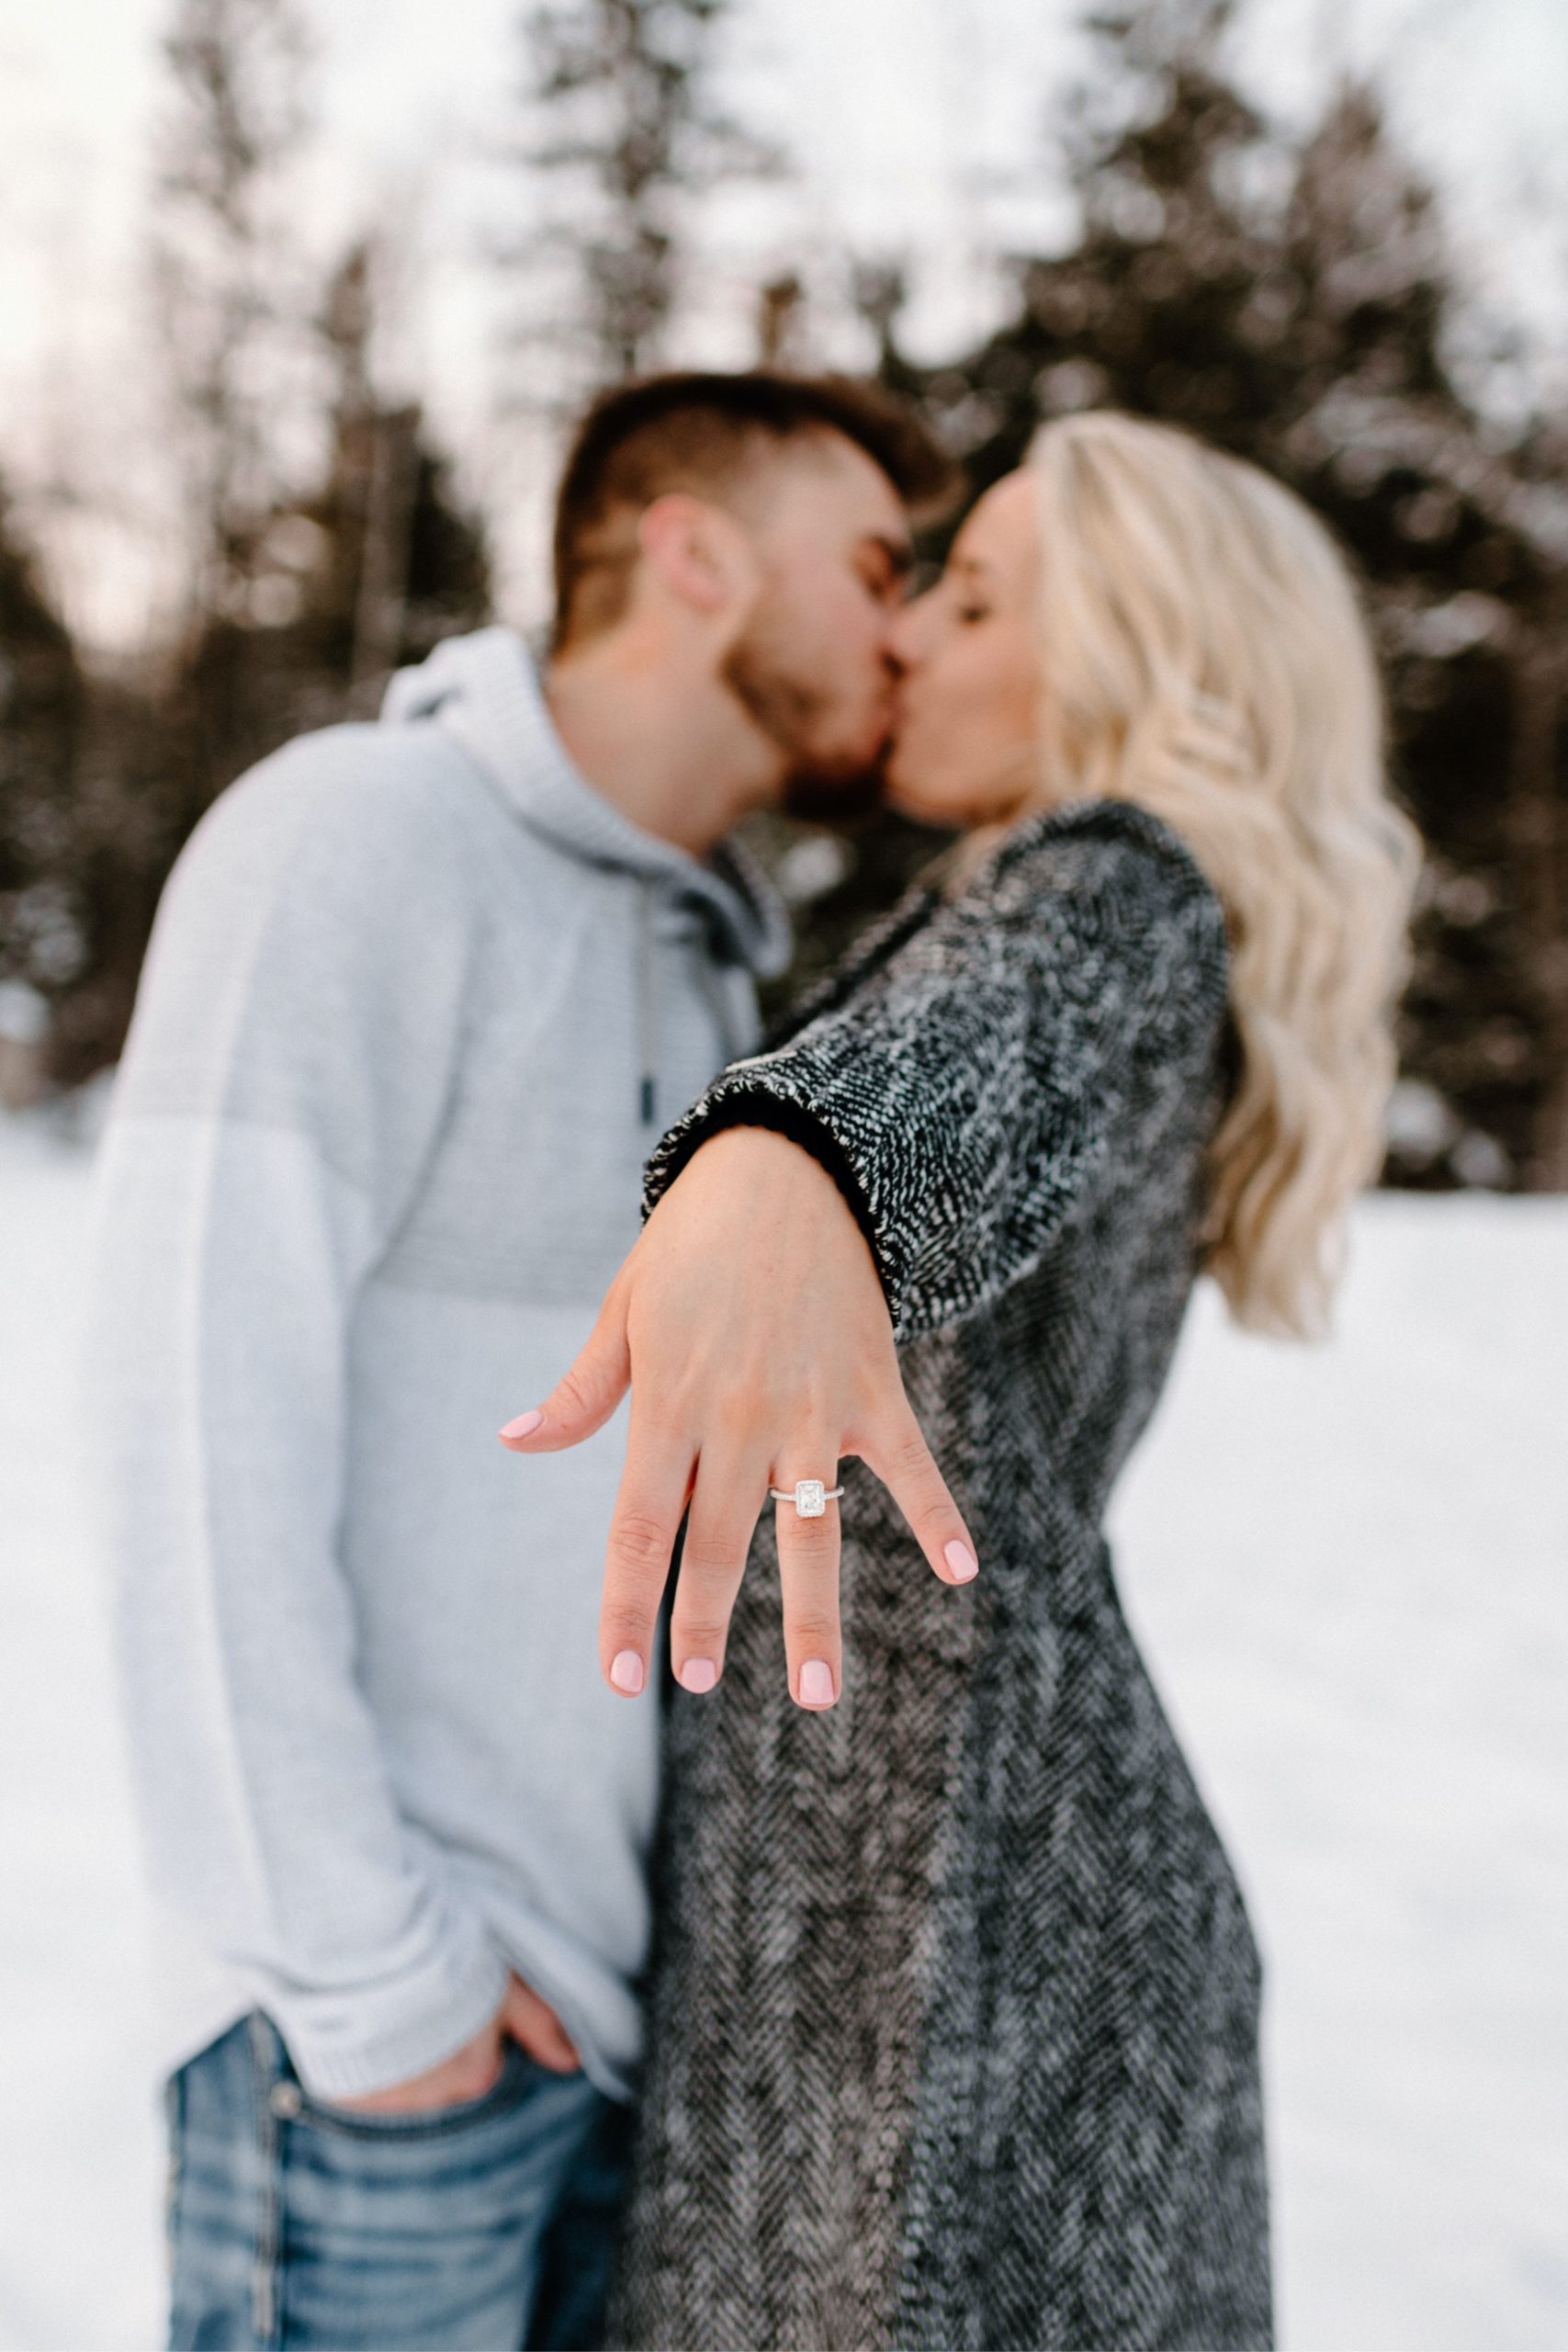 Engaged couple showing off their ring